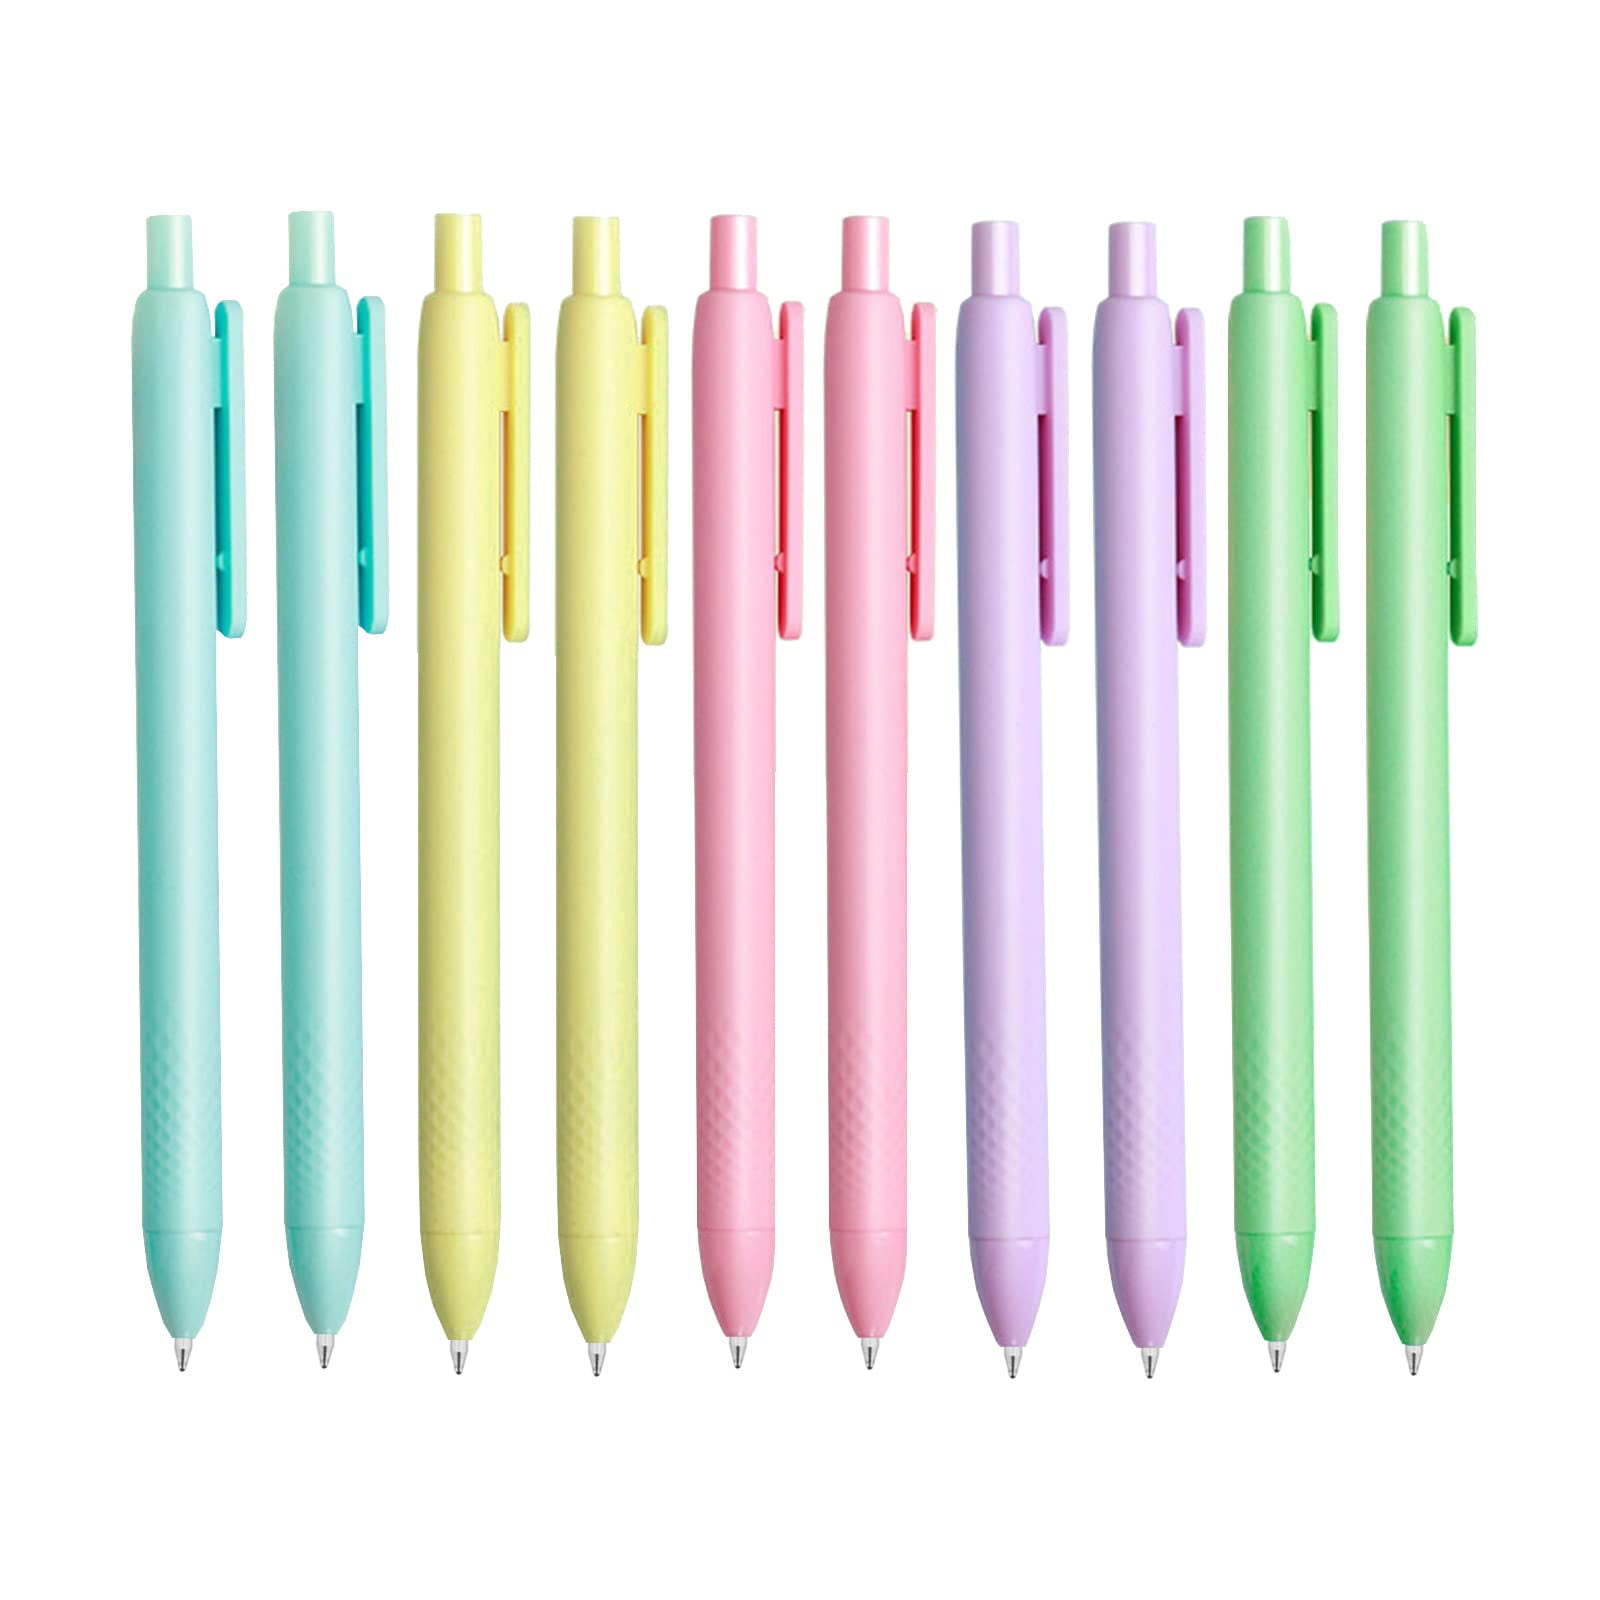  Harloon 12 Pcs Colored Gel Pens Fine Point 0.5 mm Quick Dry Ink  Pen Rotation Smooth Writing Pastel Pens Colored Ink for School Office Home  Supplies Journaling Note Taking, 6 Colors 